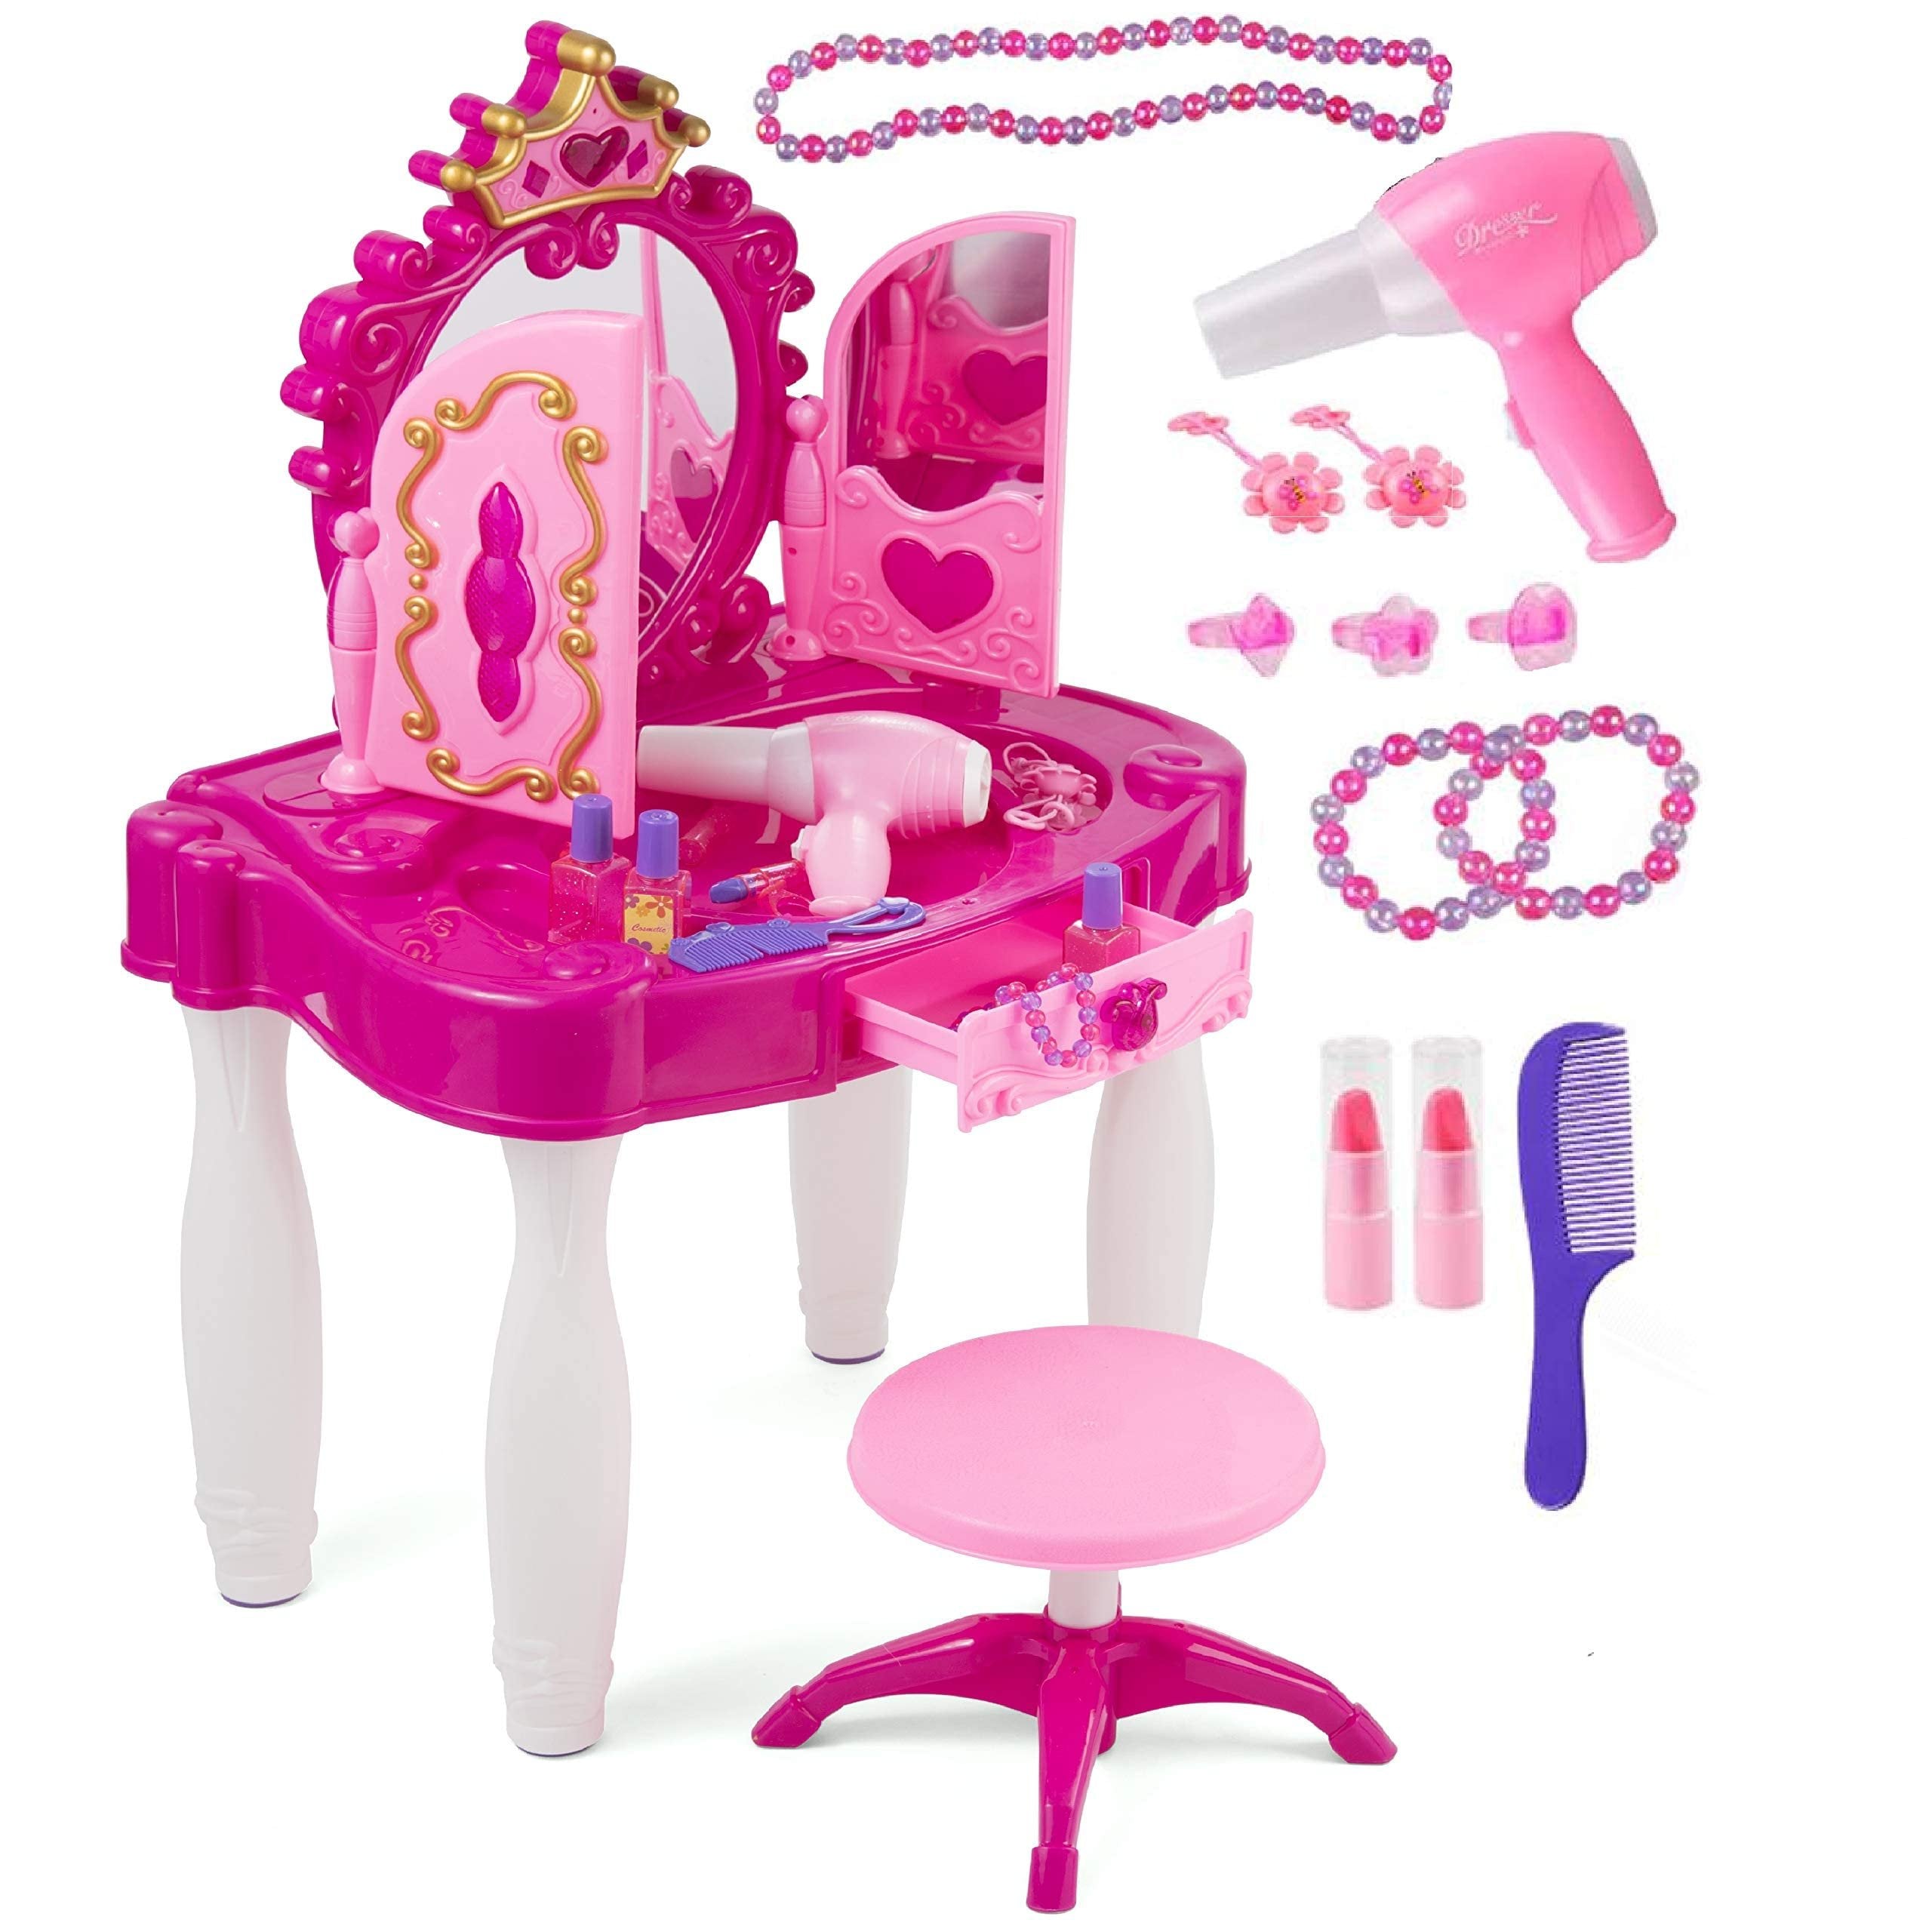 PREXTEX Kids Makeup Table with Mirror and Chair, Princess Play Set, Kids Makeup Vanity Table with Makeup Accessories and Light and Musical Sound Effects for Toddler Girls